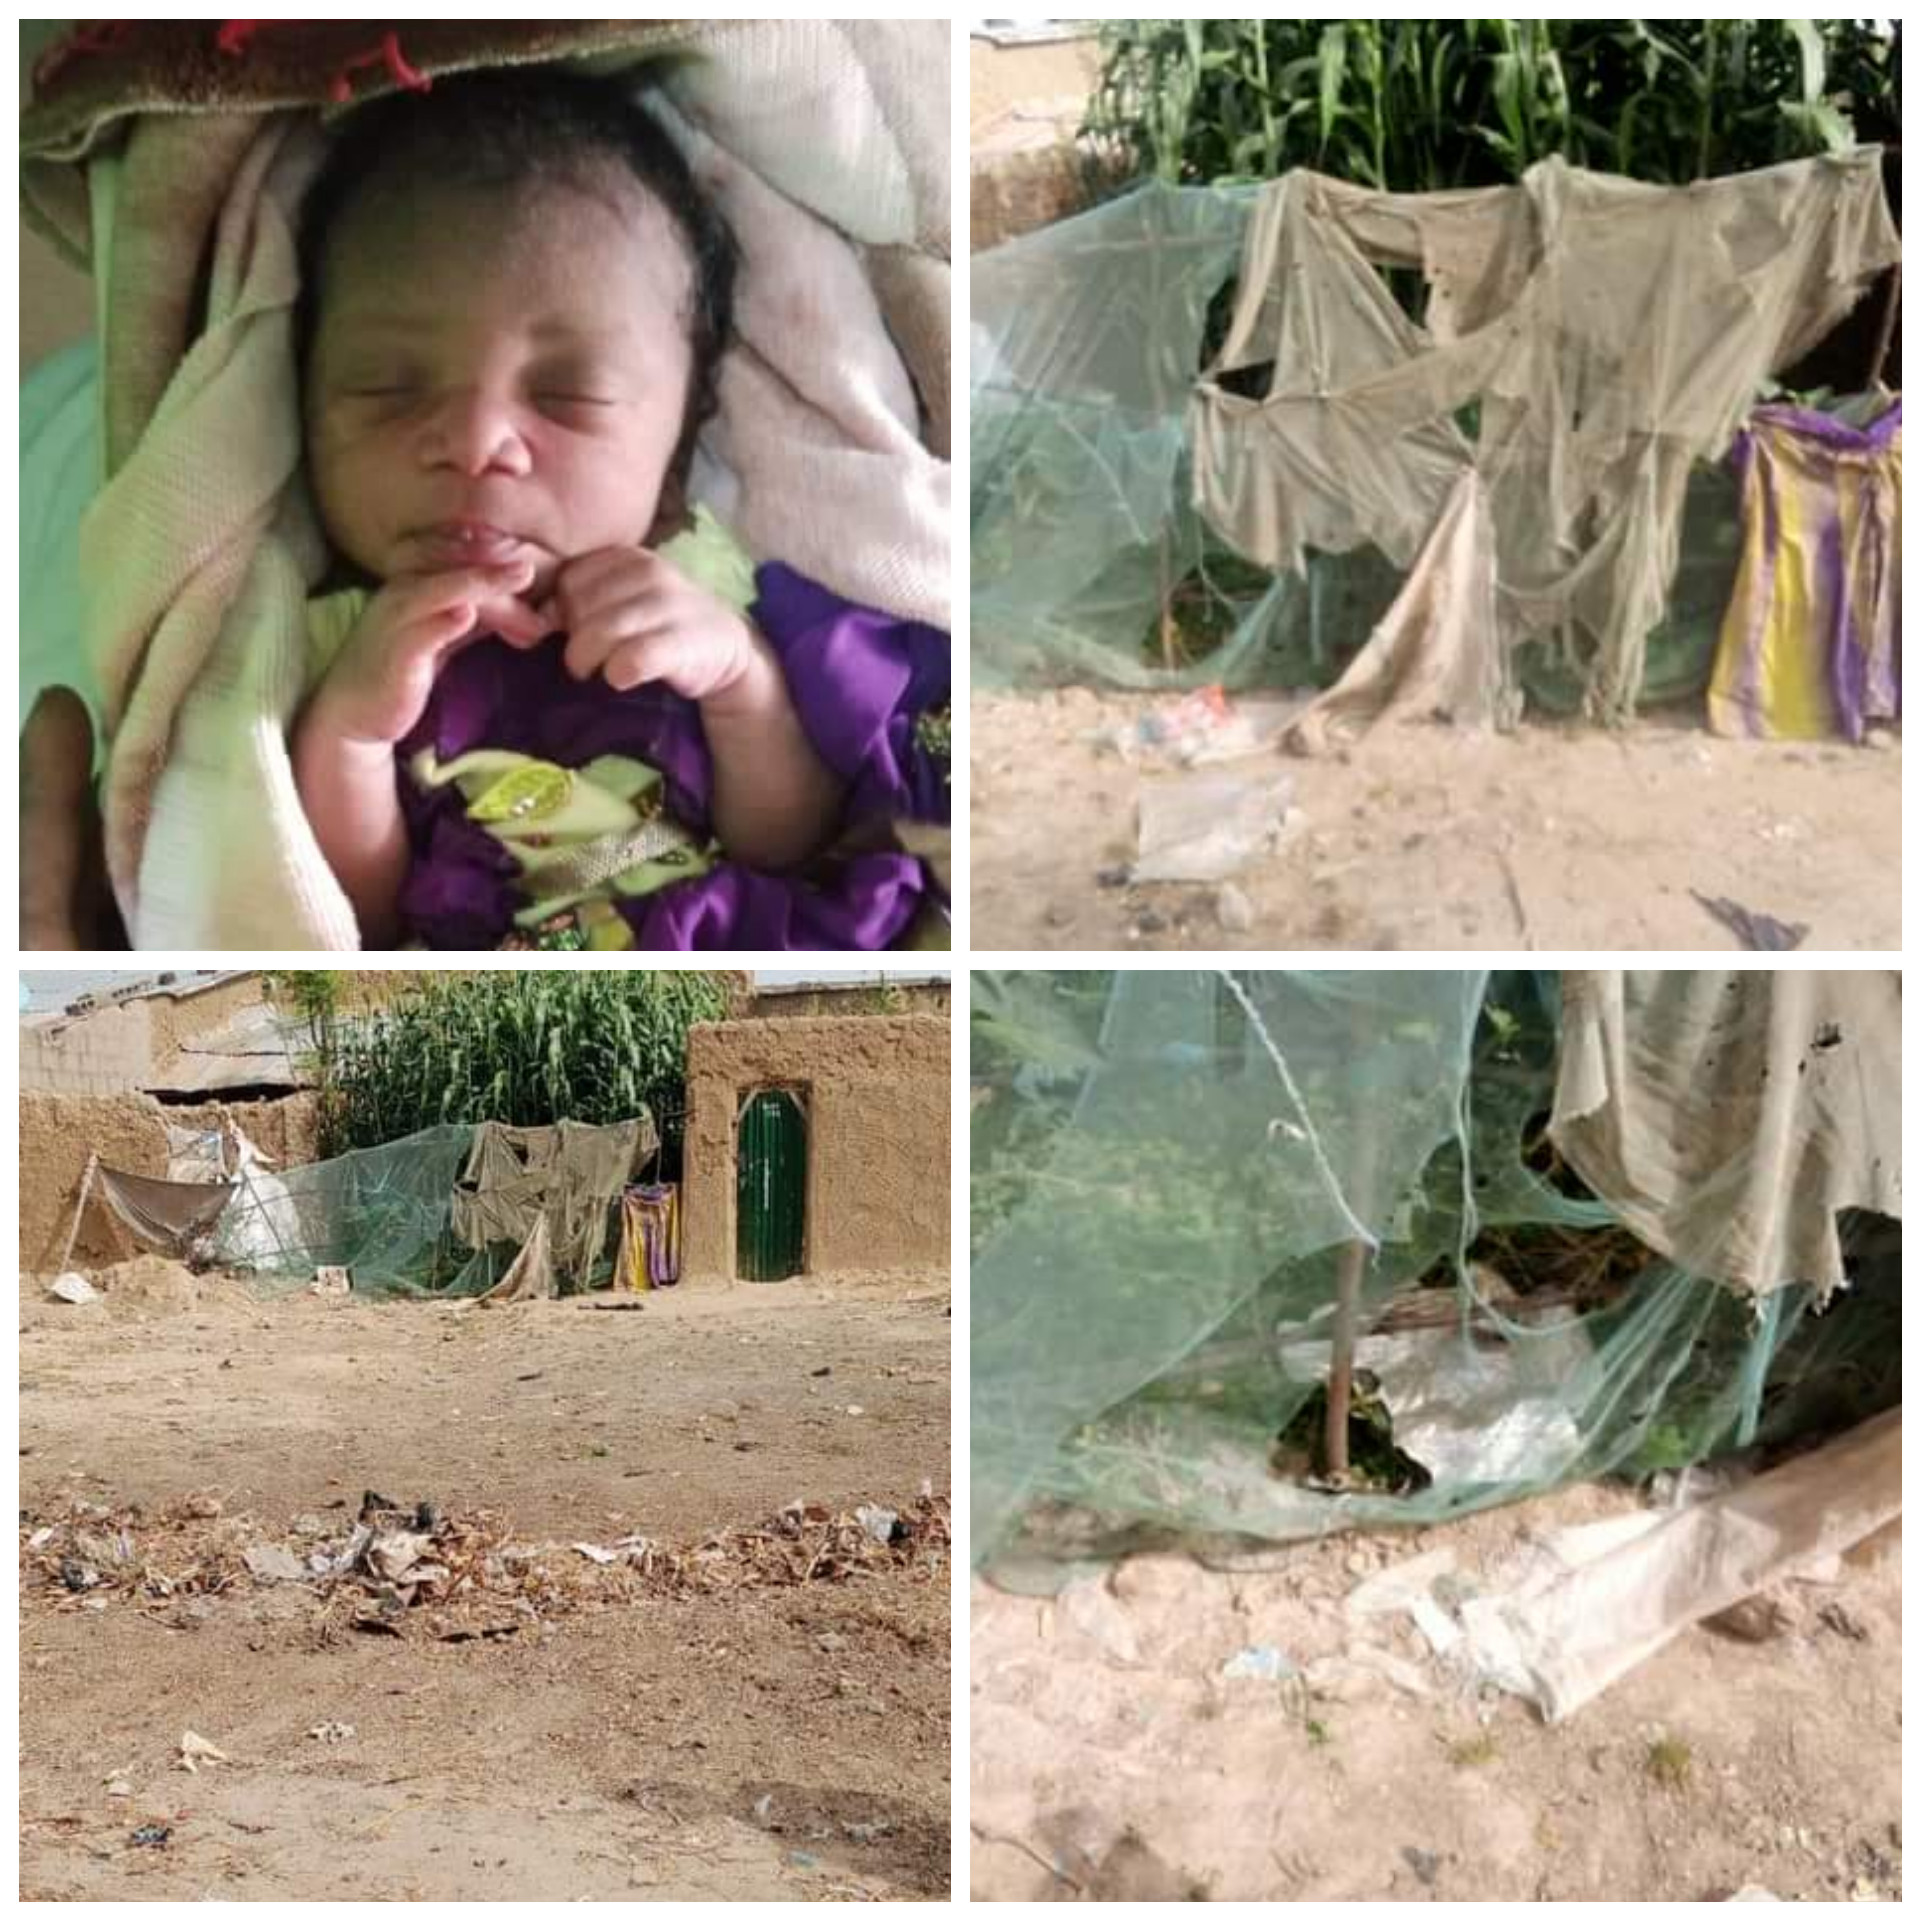 NSCDC rescues newborn baby abandoned in dilapidated building in Jigawa